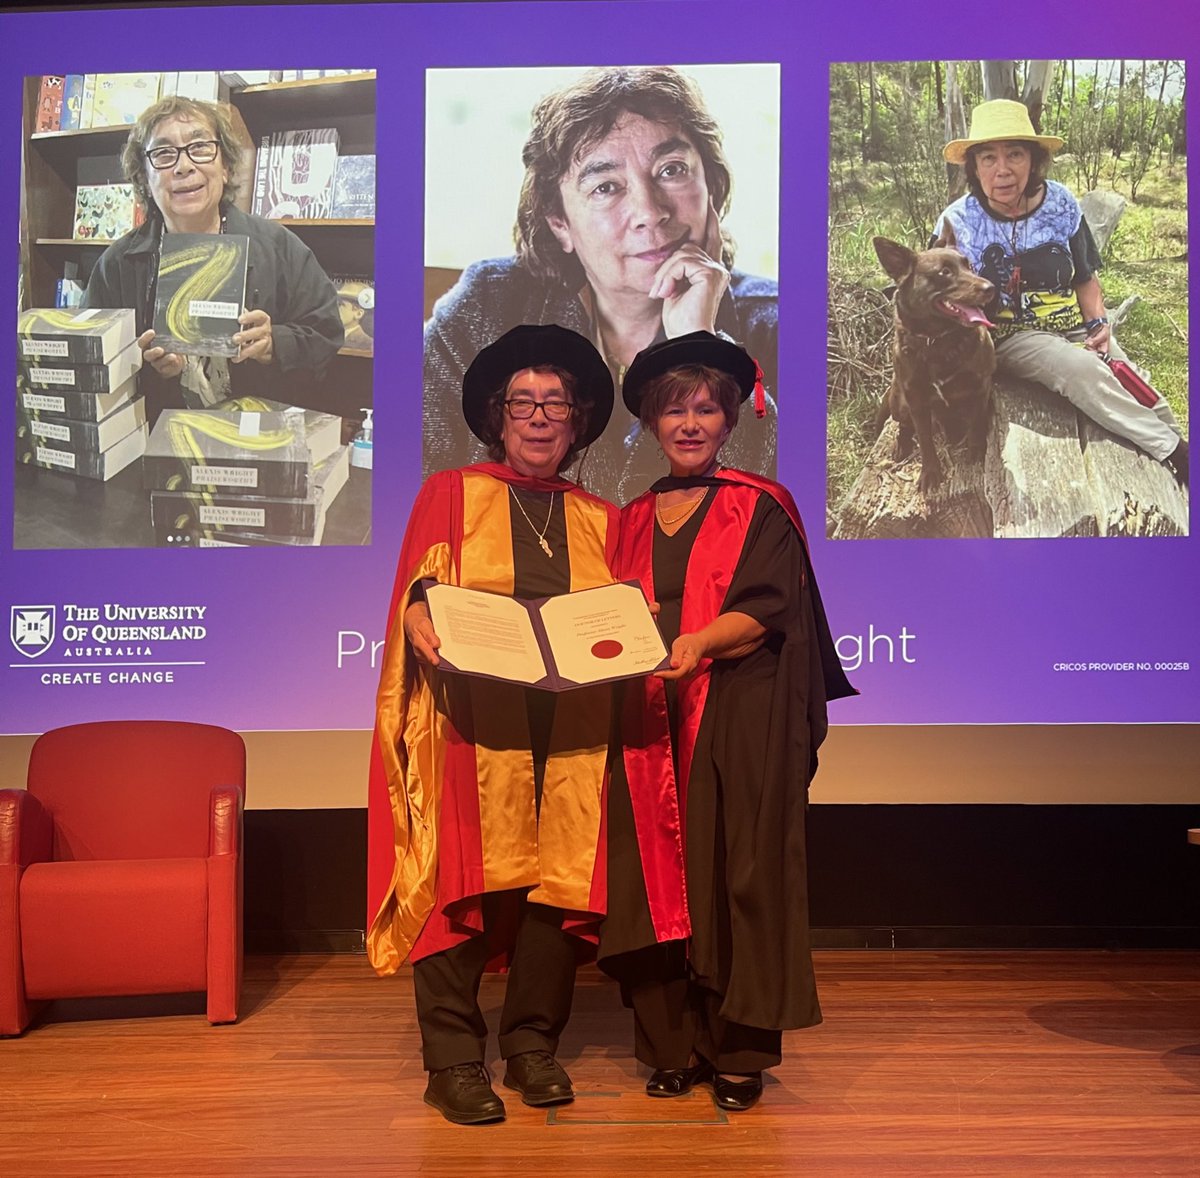 Waanyi woman, distinguished author, & Professor at @westernsydneyu, Dr Alexis Wright FAHA was awarded an Honorary Doctorate from The Uni of Queensland this afternoon. Prof @BronFredericks led the conferral ceremony with UQ’s Chancellor & VC at the State Library of Victoria.